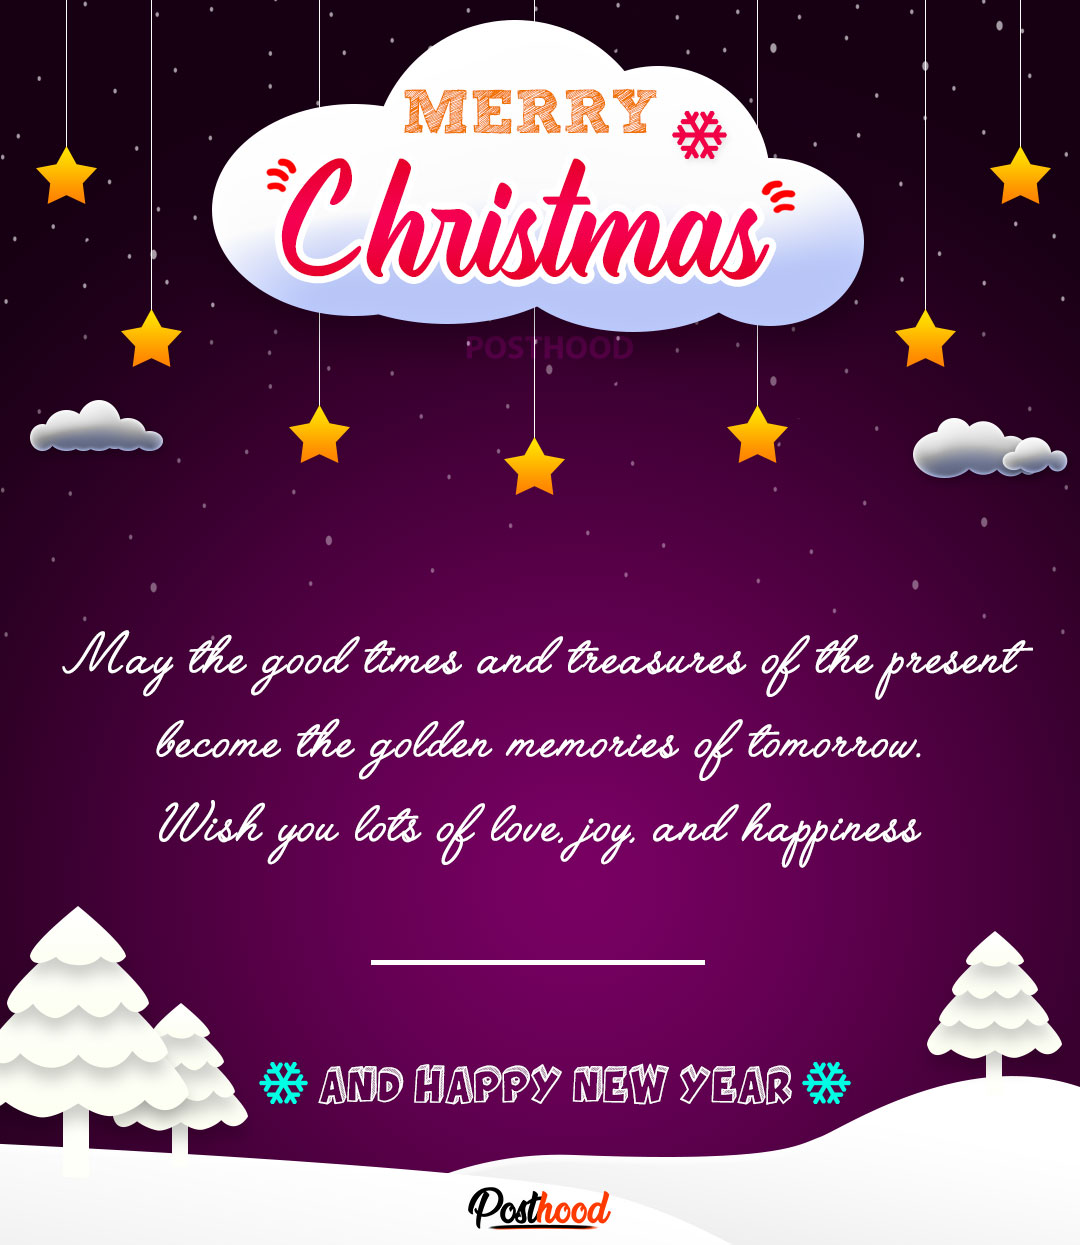 Send lots of love, Joy, and happineess to your loved one with these short and cute Christmas wishes. Merry Christmas and New Year!!